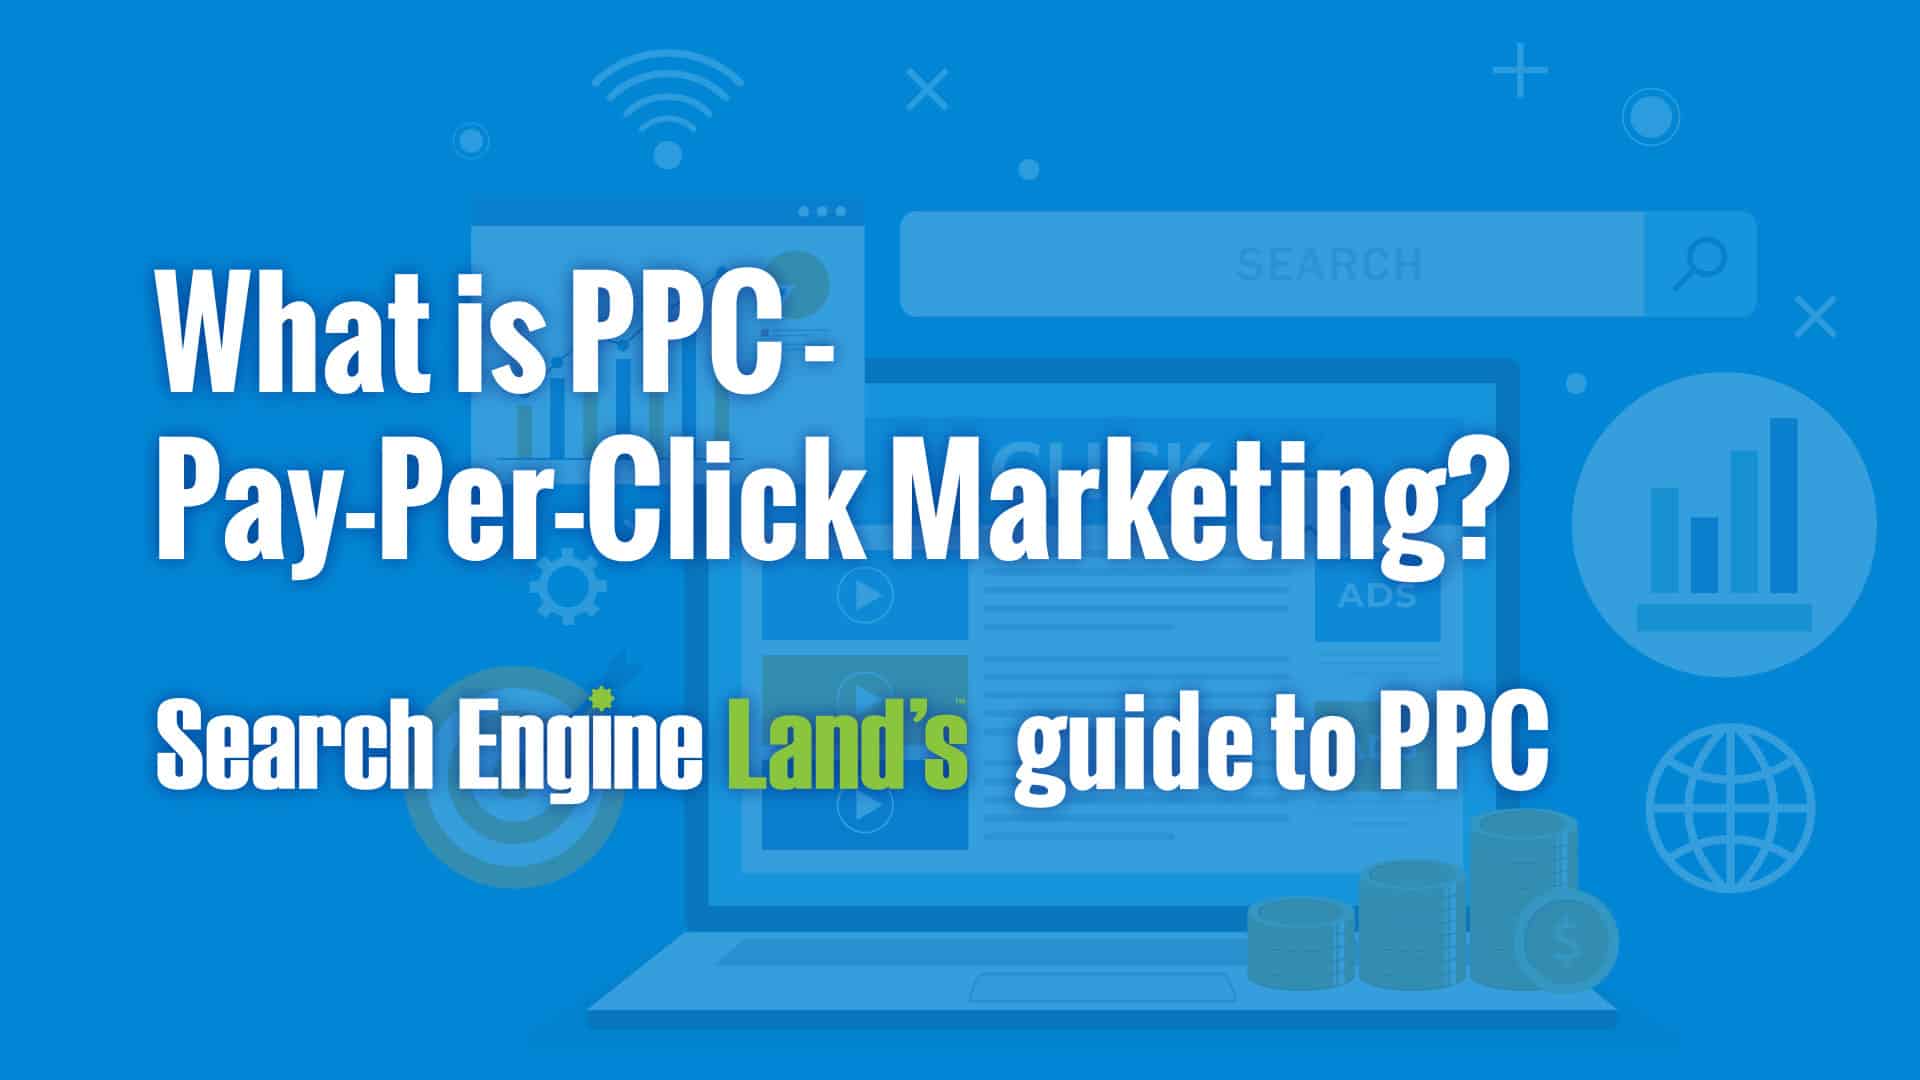 Search Engine Land’s updated What is PPC guide is now available